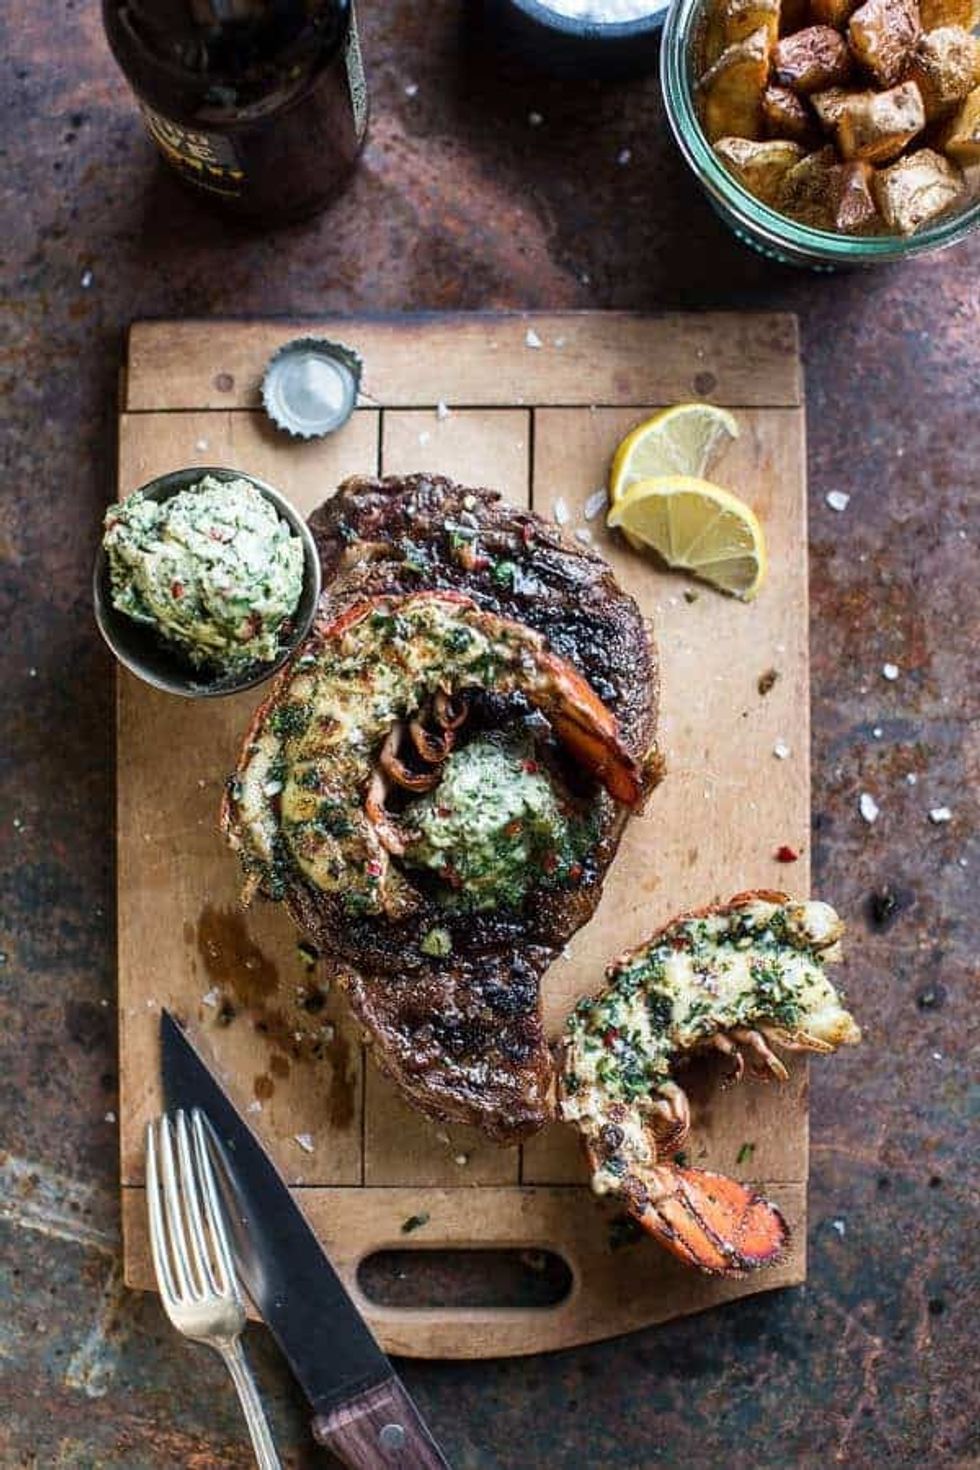 Surf and Turf: Steak and Lobster with Spicy Roasted Garlic Chimichurri Butter